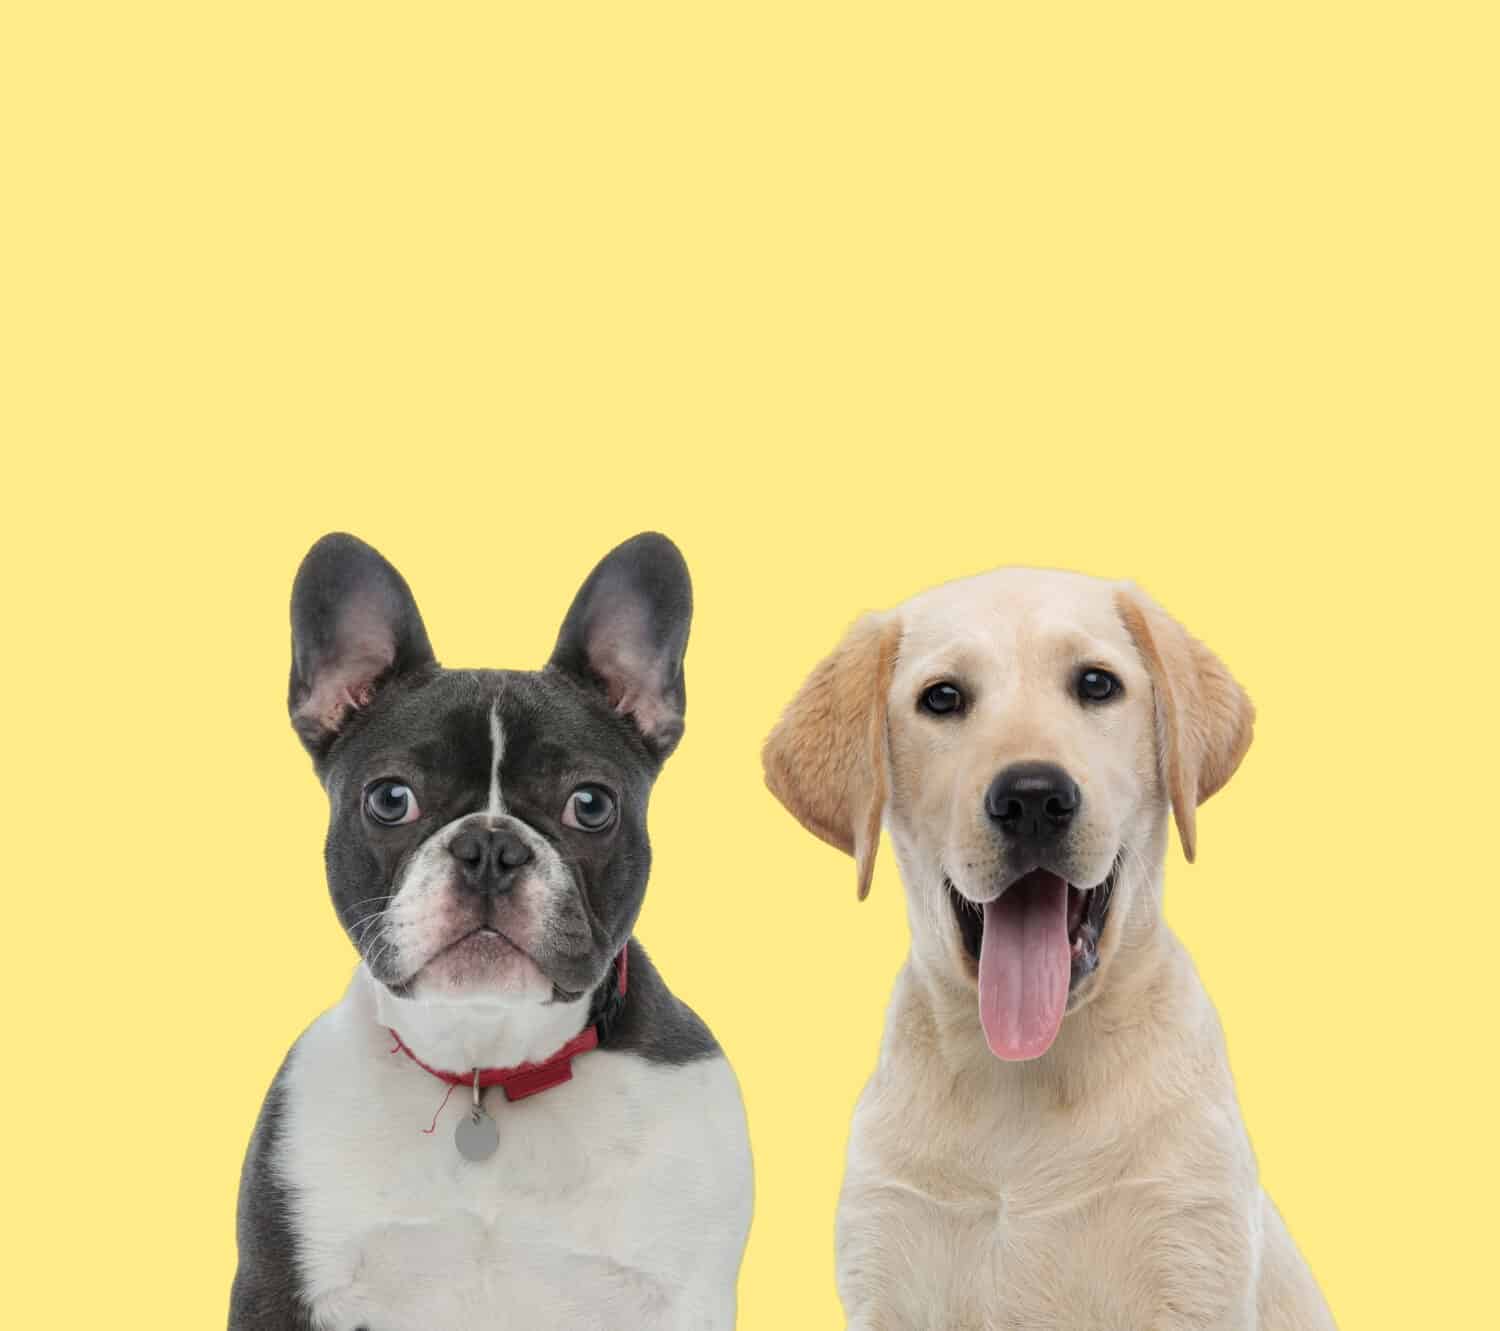 cute french bulldog dog wearing red collar next to a labrador retriever dog panting happy on yellow background